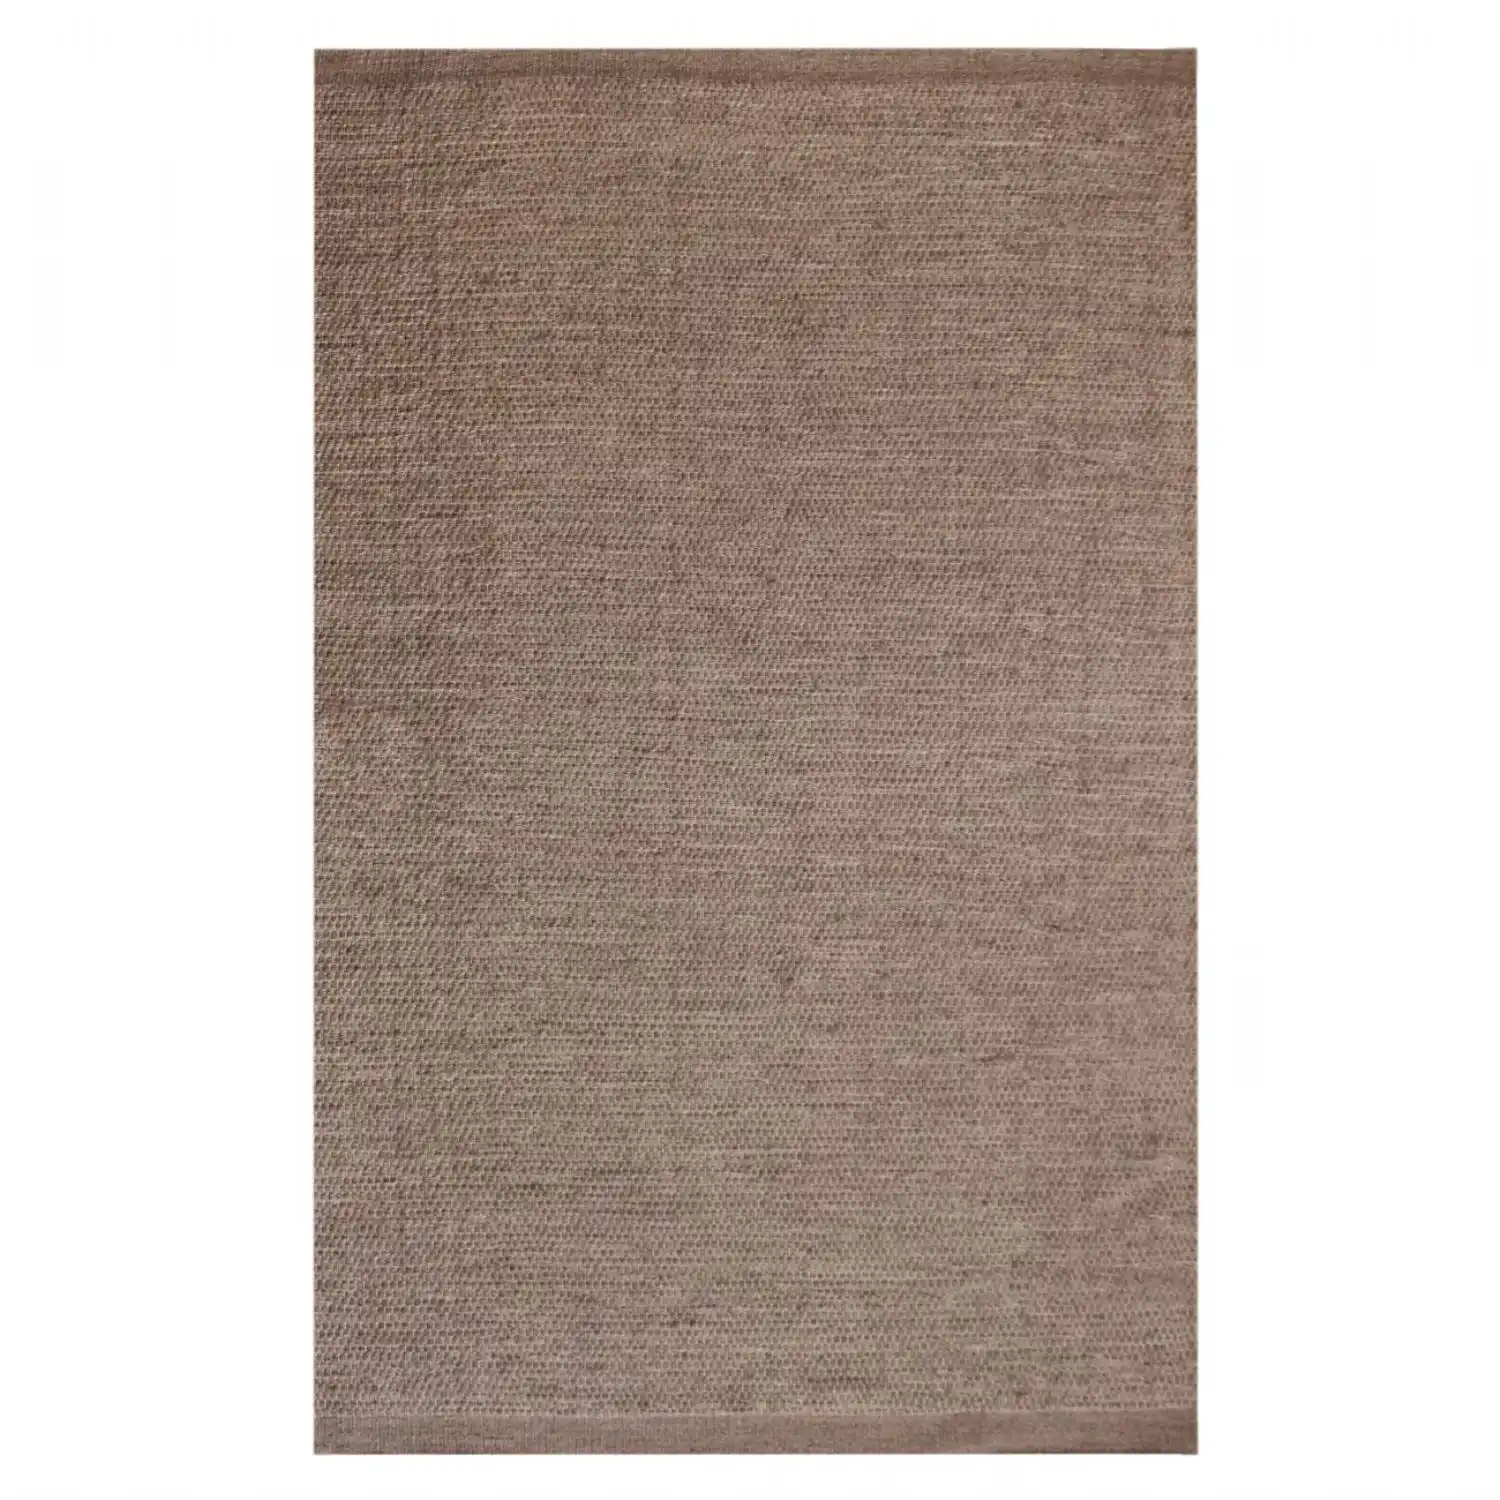 Hand Woven Ivory And Beige Wool Rug